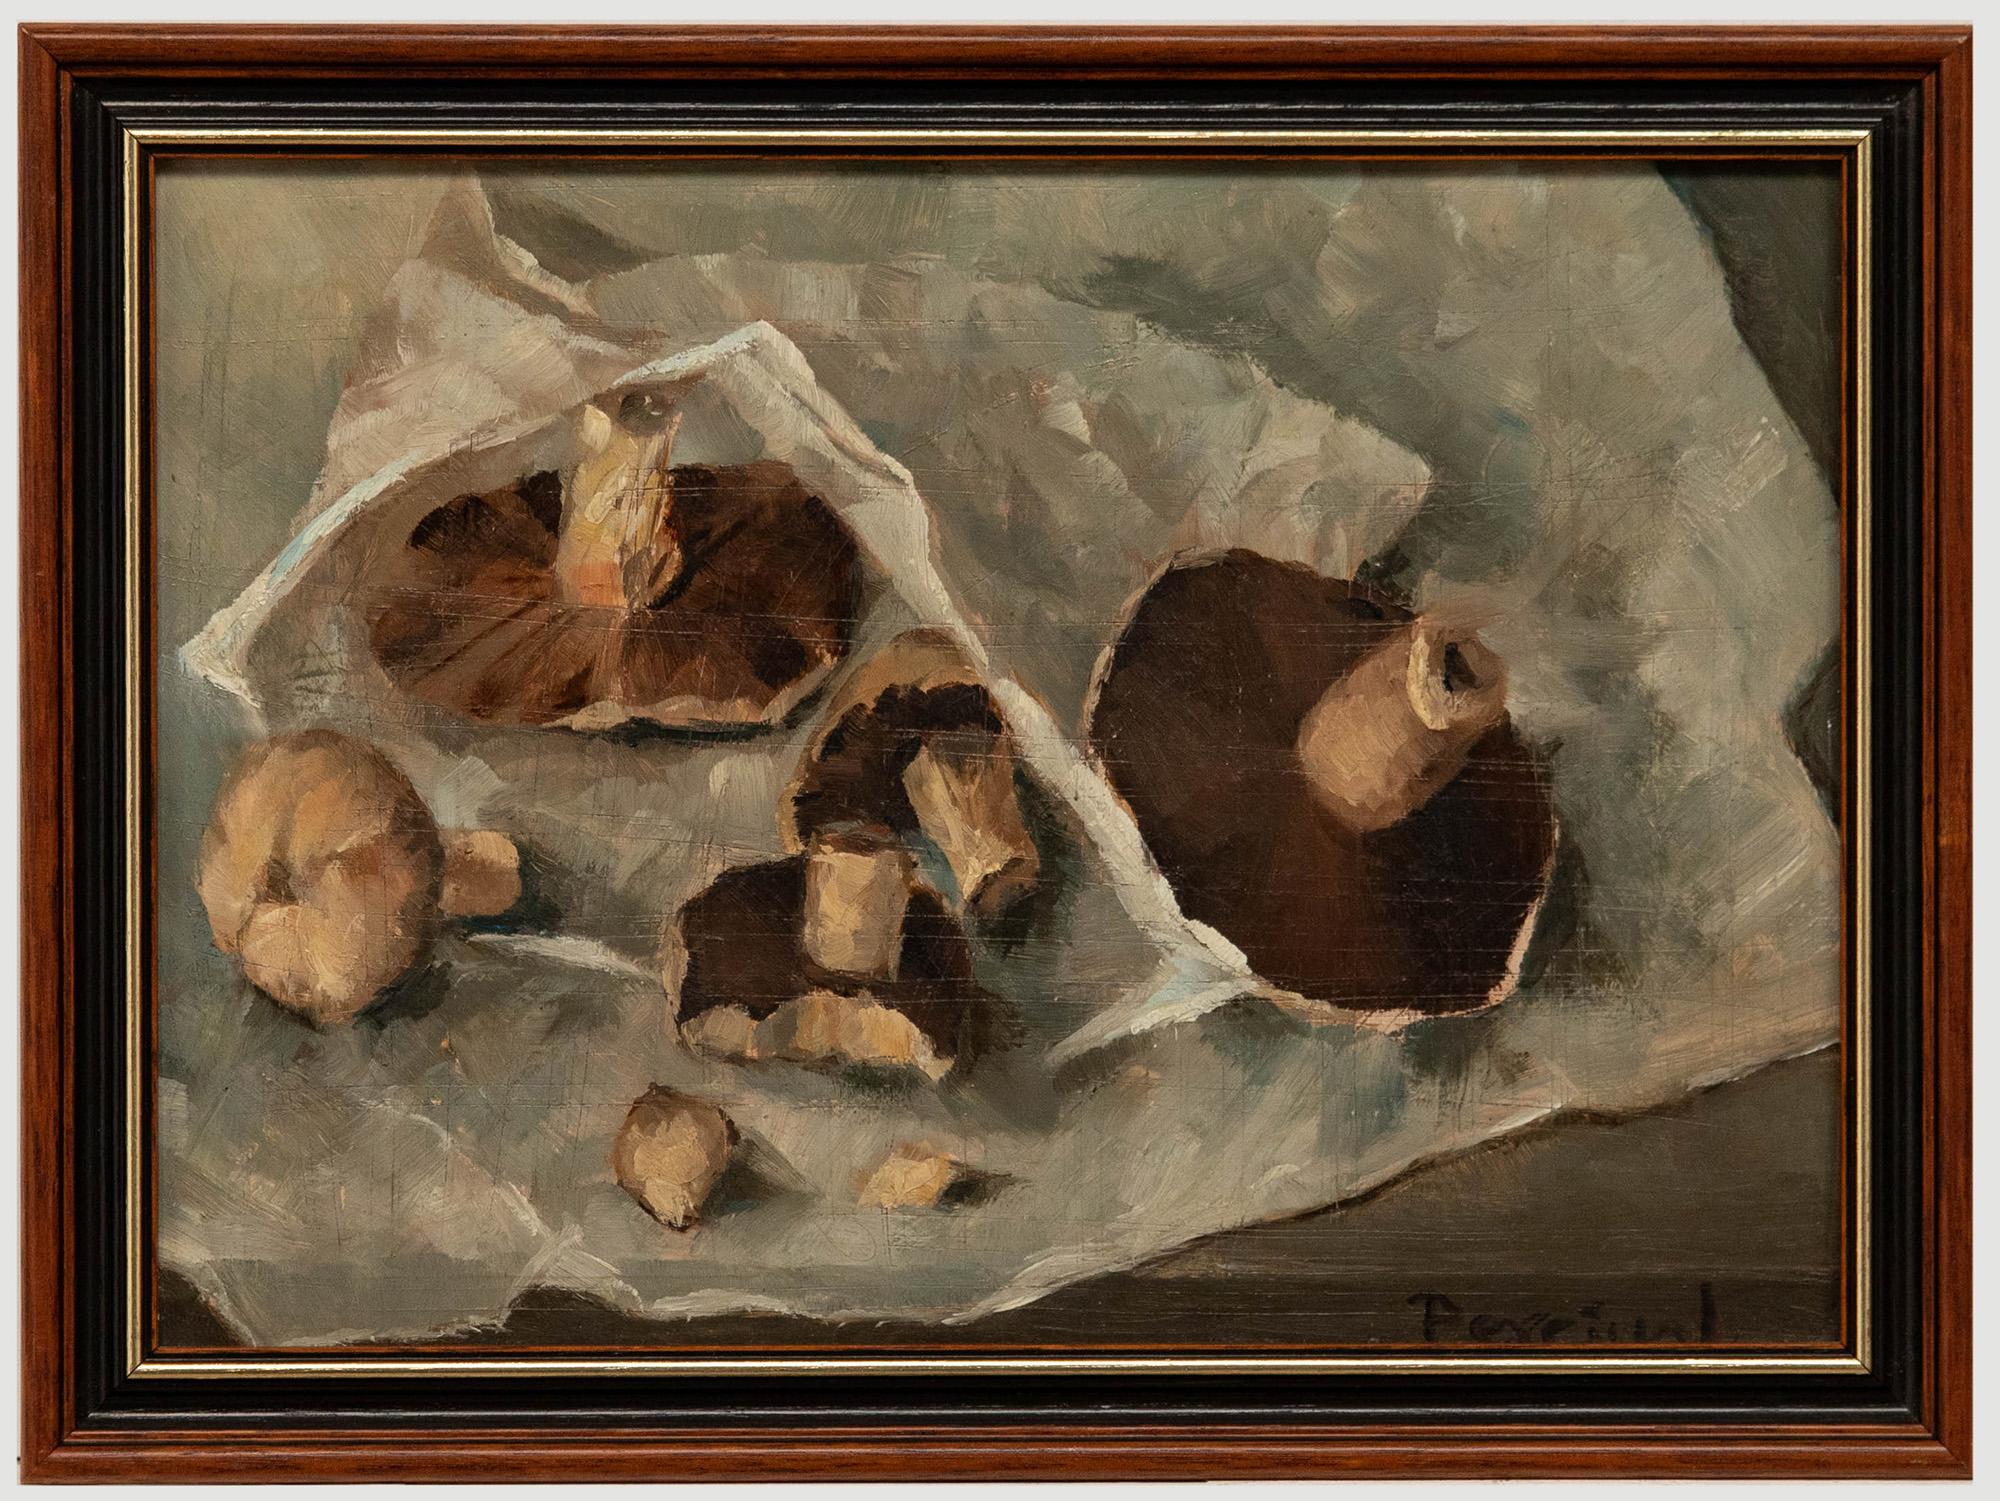 Unknown Still-Life Painting - Percival - Framed Mid 20th Century Oil, Study of Mushrooms